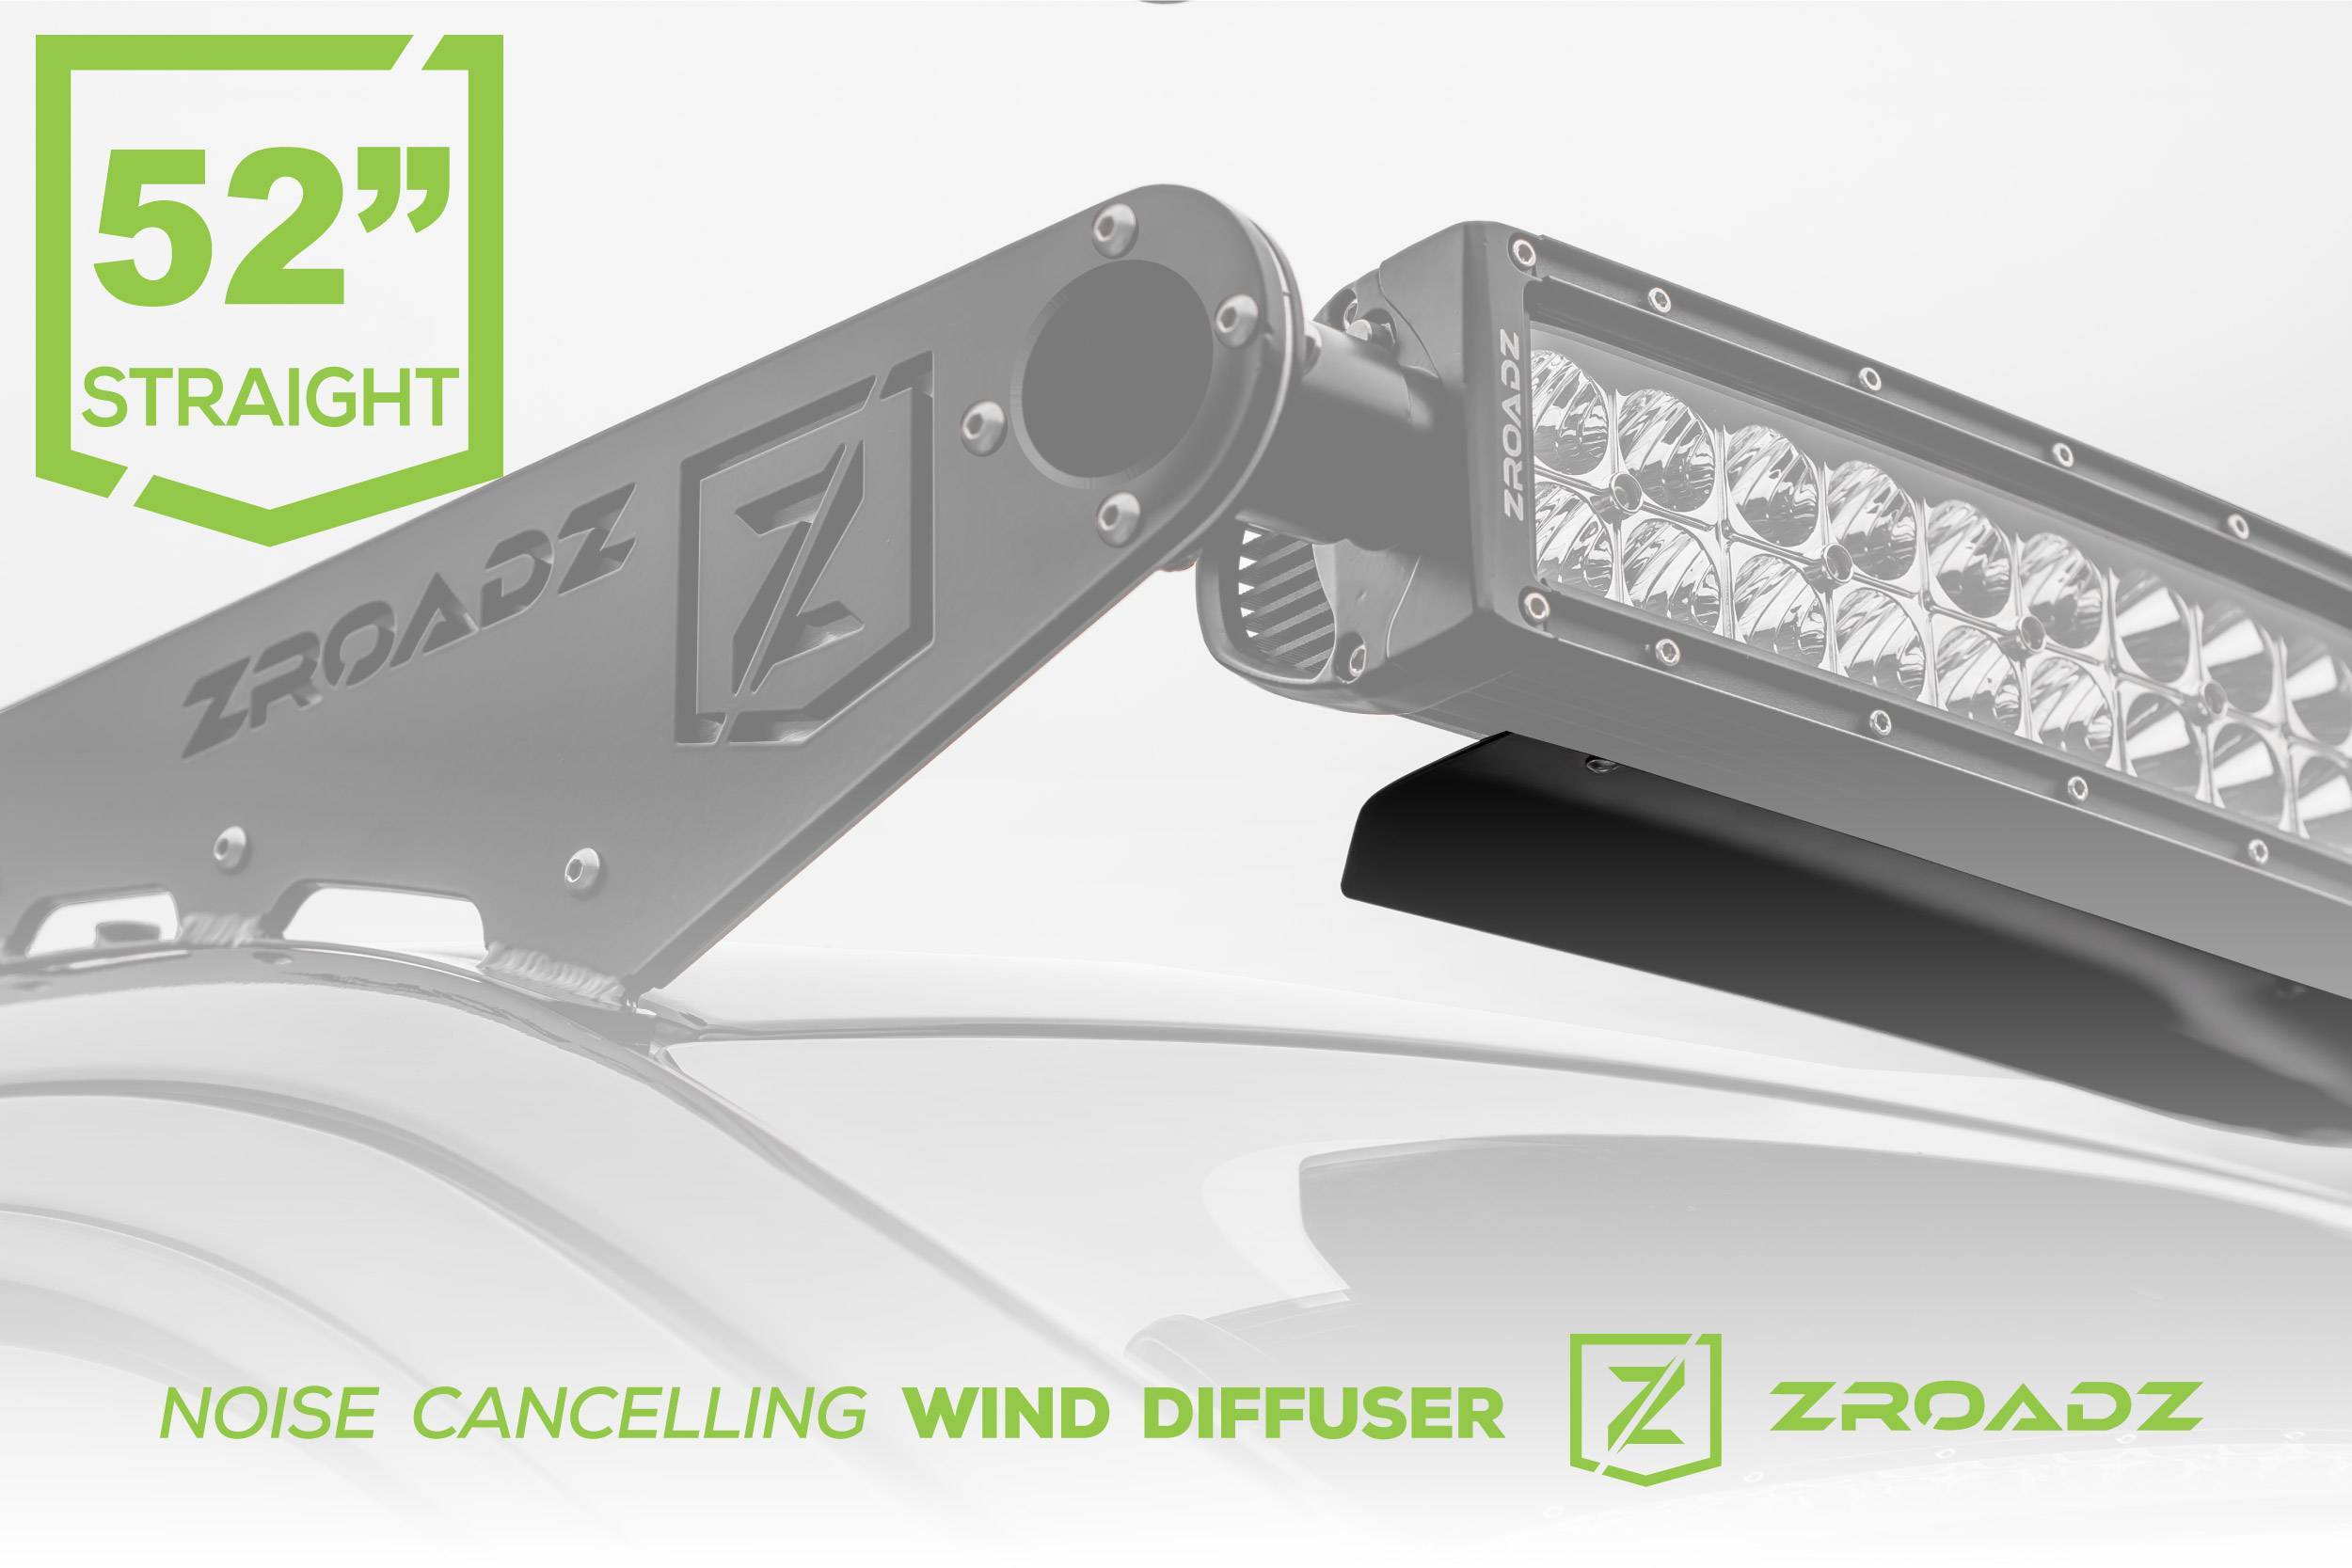 ZROADZ OFF ROAD PRODUCTS - Noise Cancelling Wind Diffuser for 52 Inch Straight LED Light Bar - PN #Z330052S